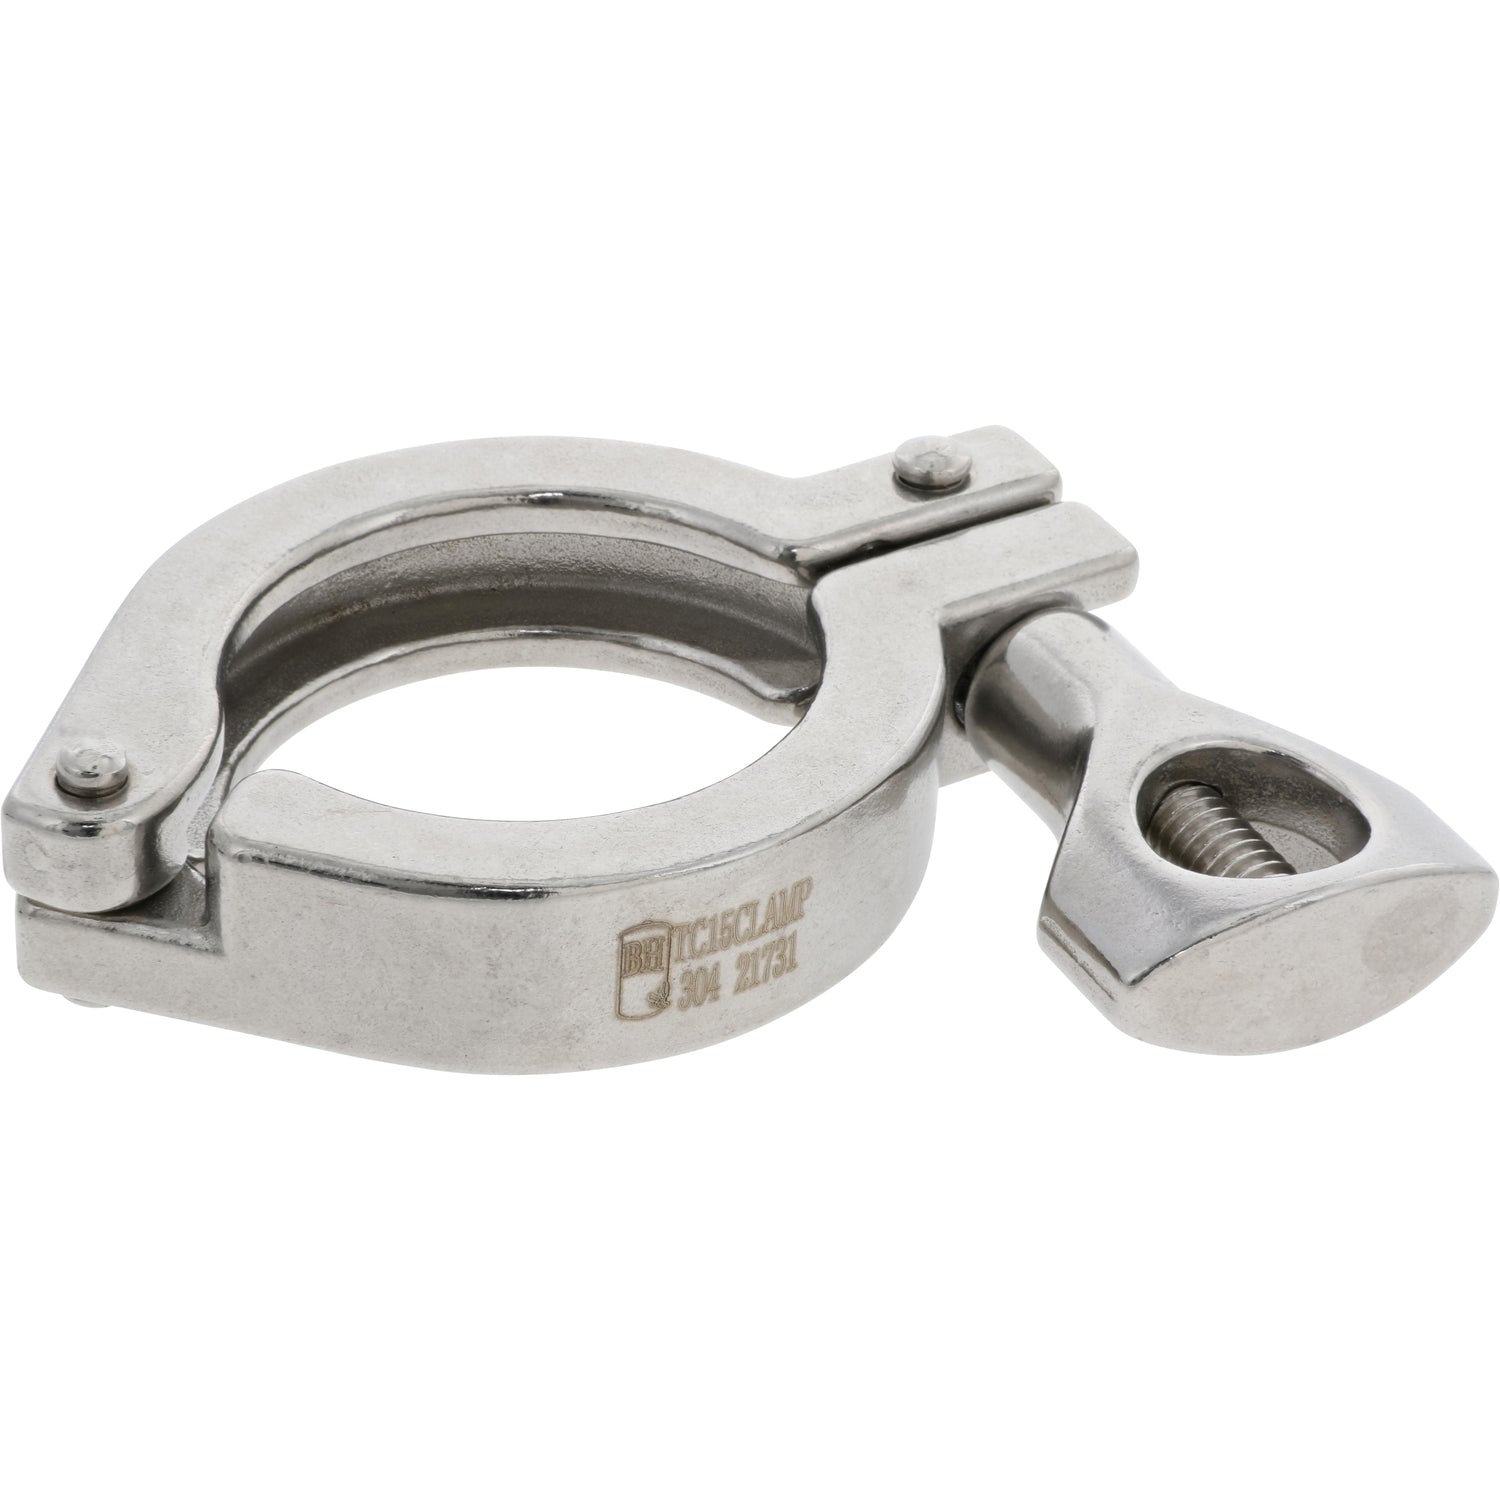 Closed stainless steel 1.5" tri-clamp on white background. 